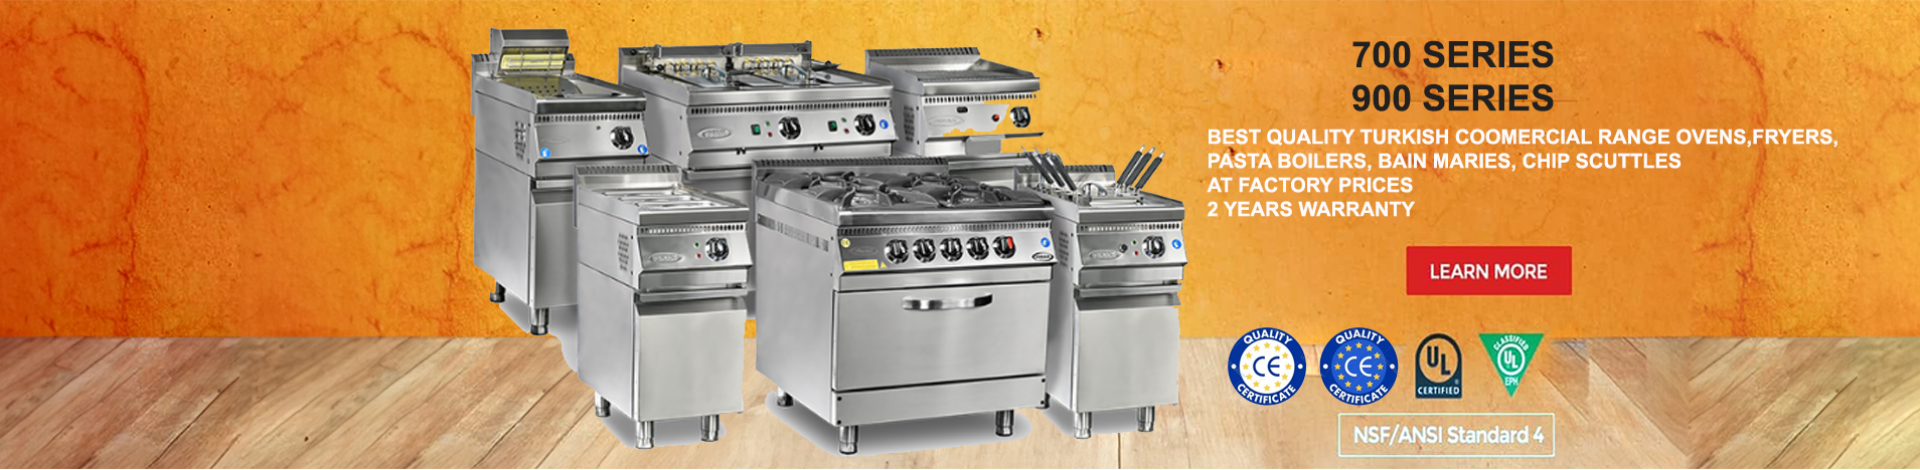 900 series coomercial cookers